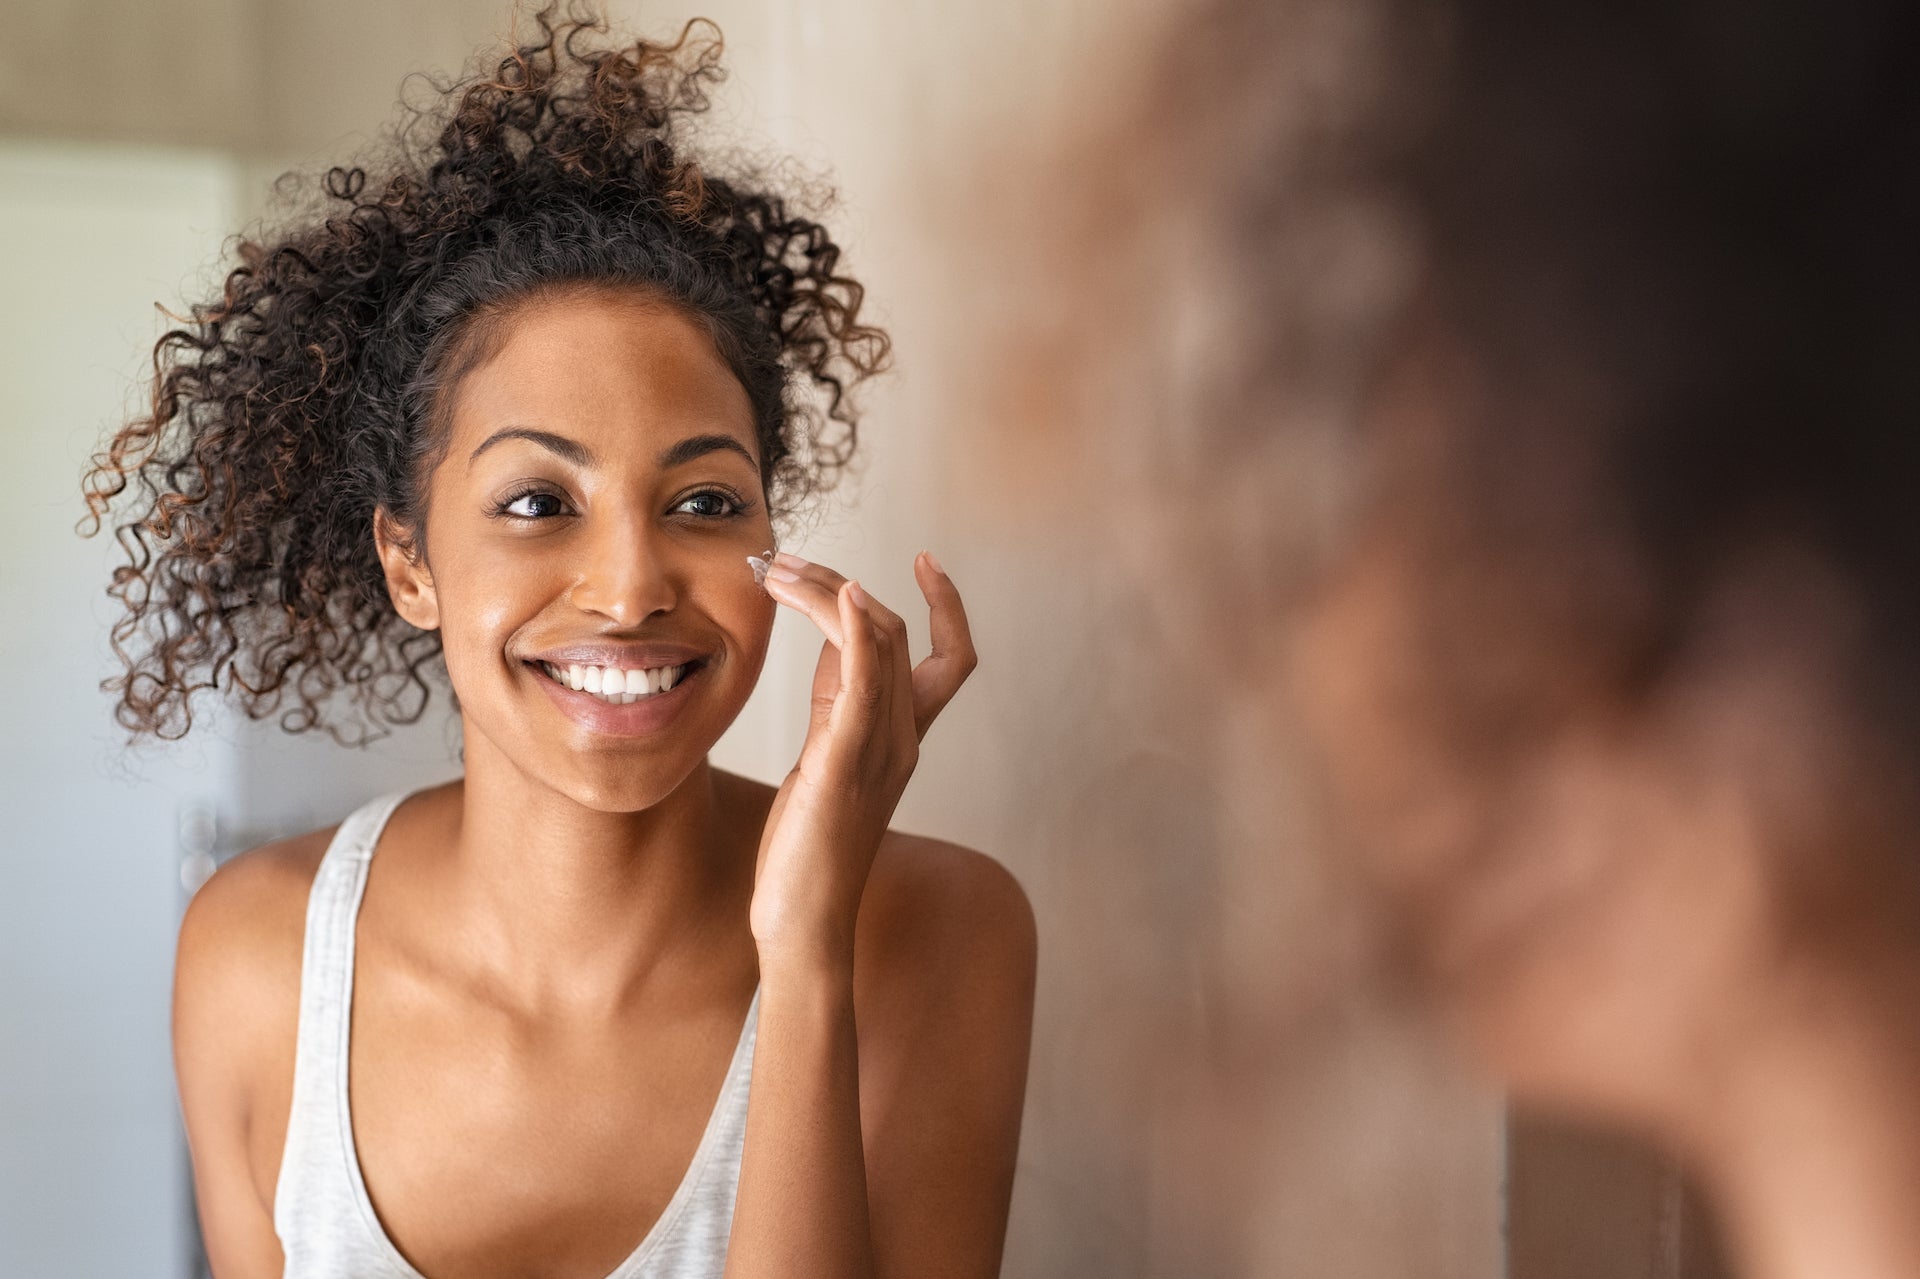 6 Easy Ways You Can Get Rid of Dark Under-Eye Circles at Home